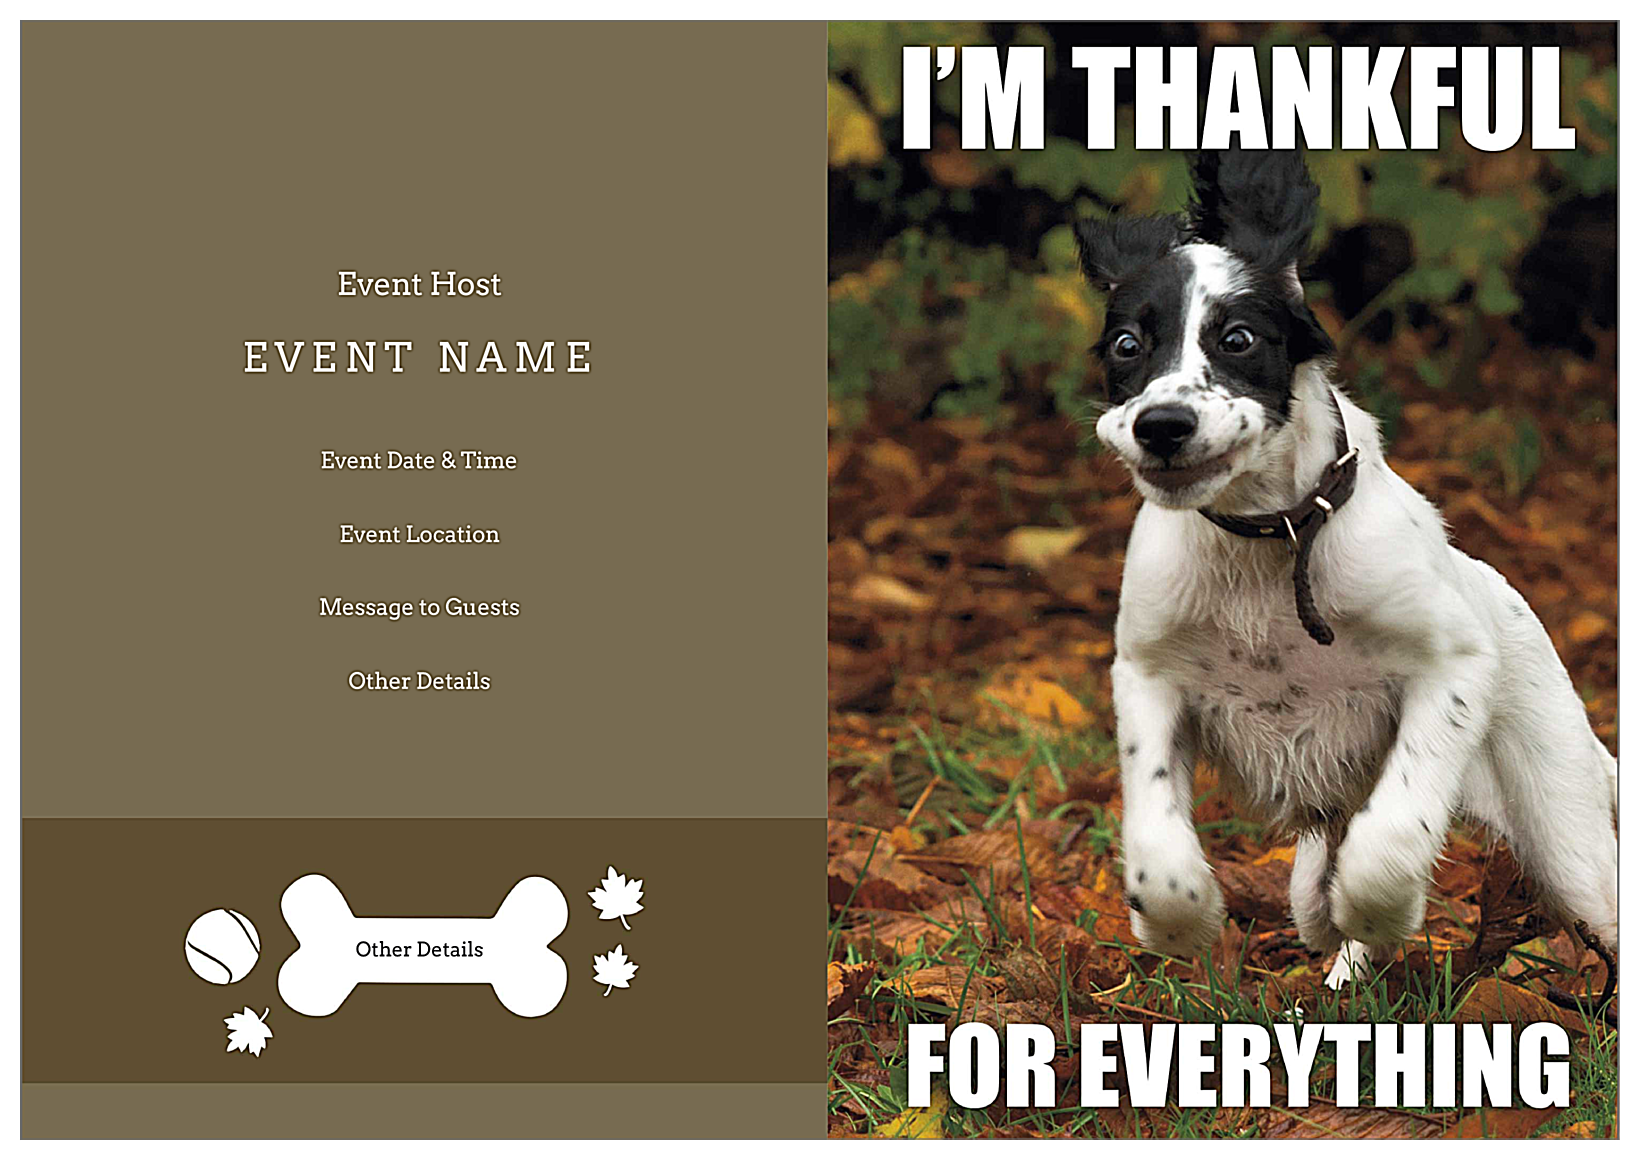 Thankful Pup front - Greeting Cards Maker